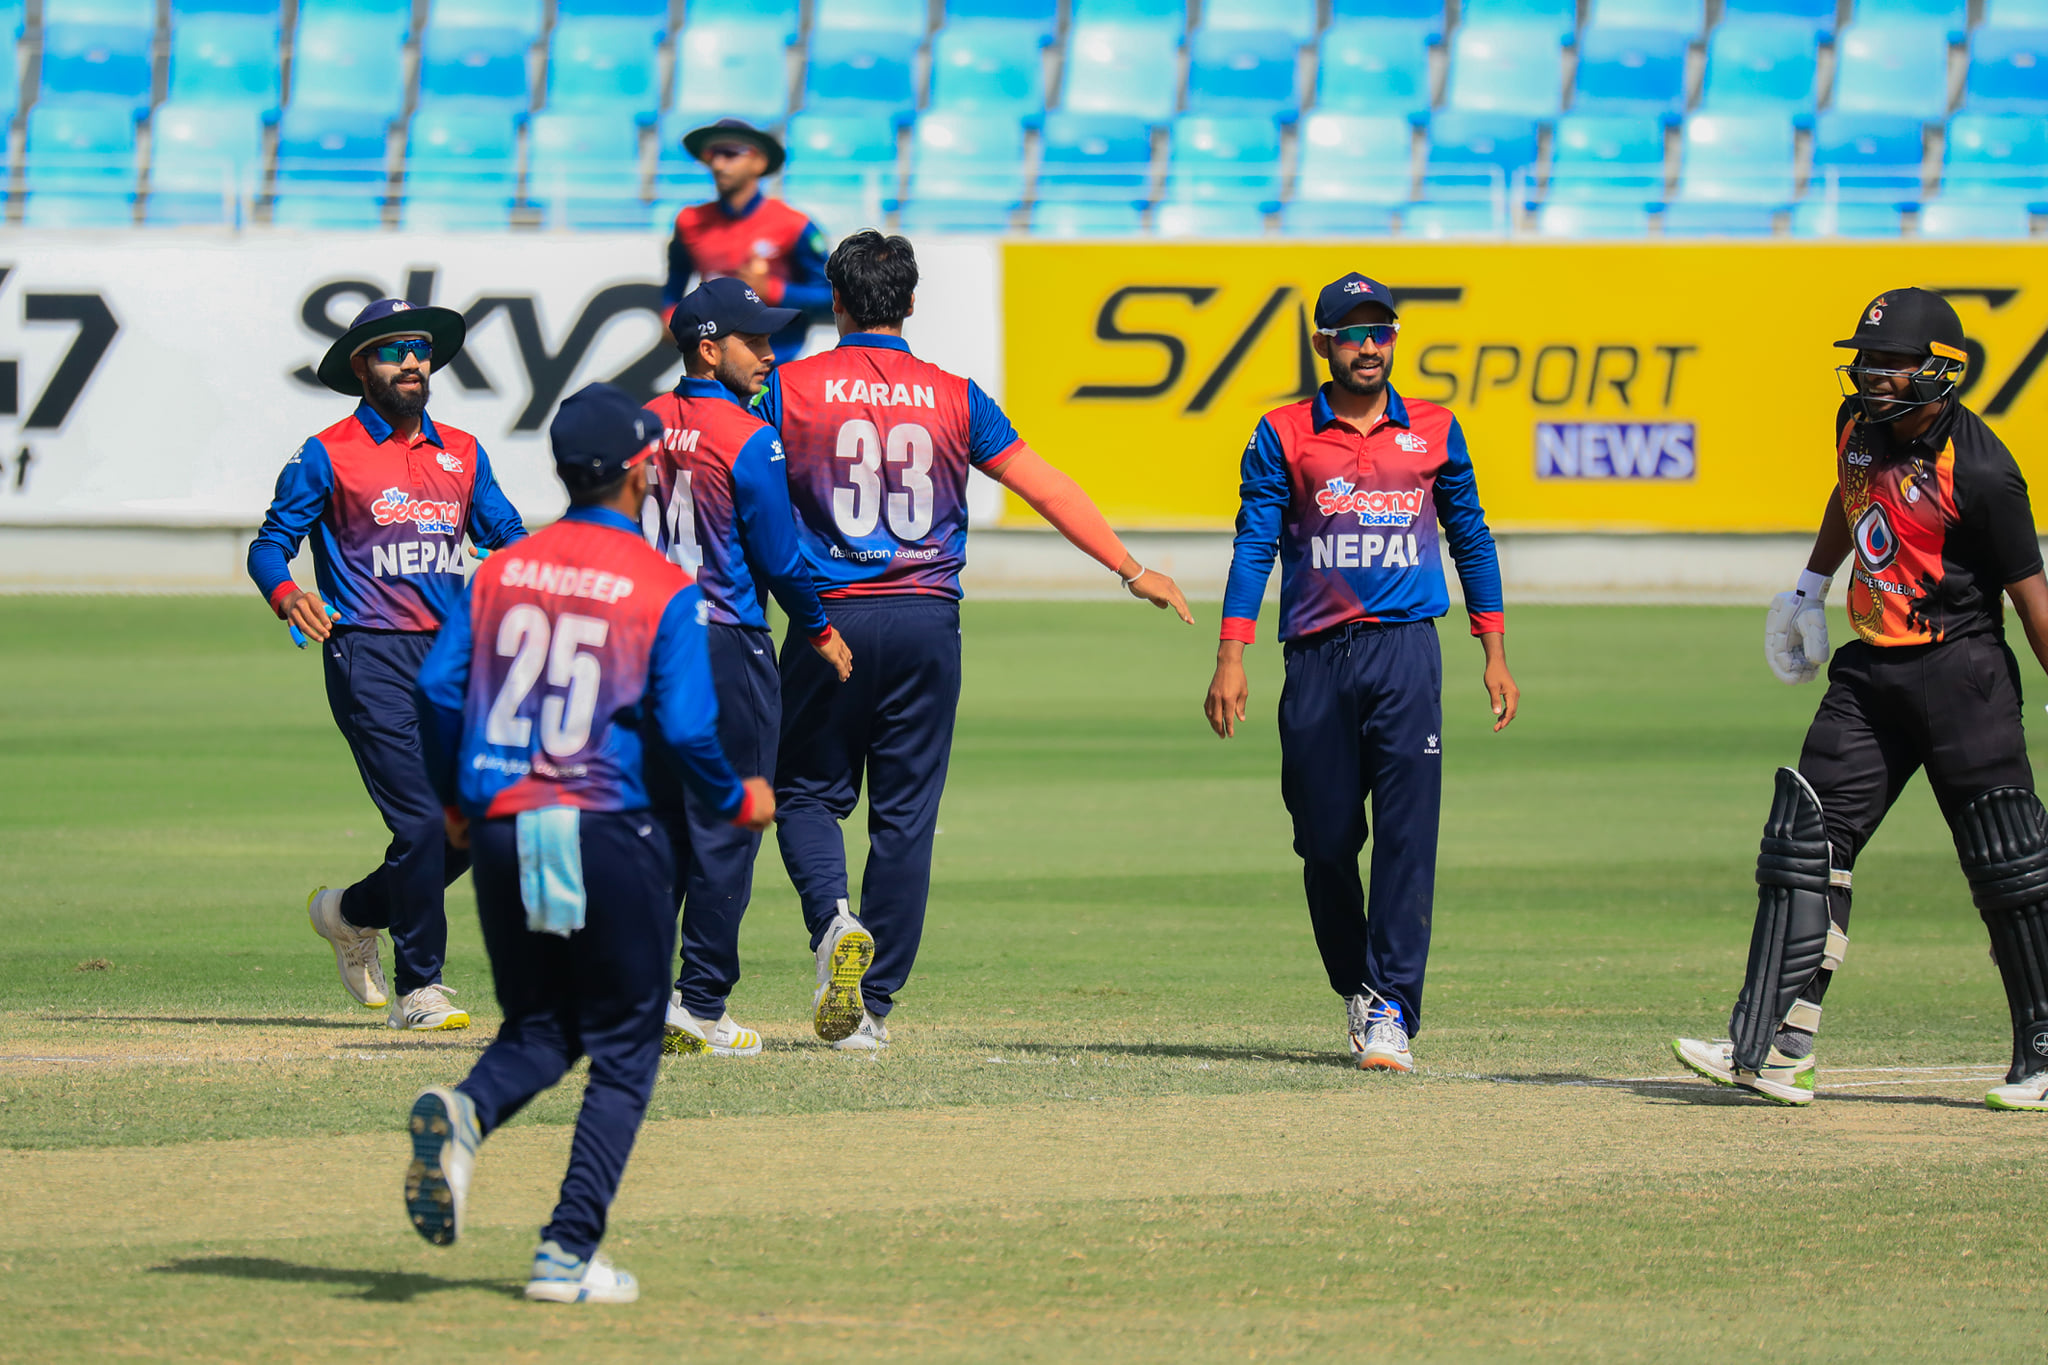 ICC Cricket World Cup League-II: Nepal beat PNG by 7 wickets